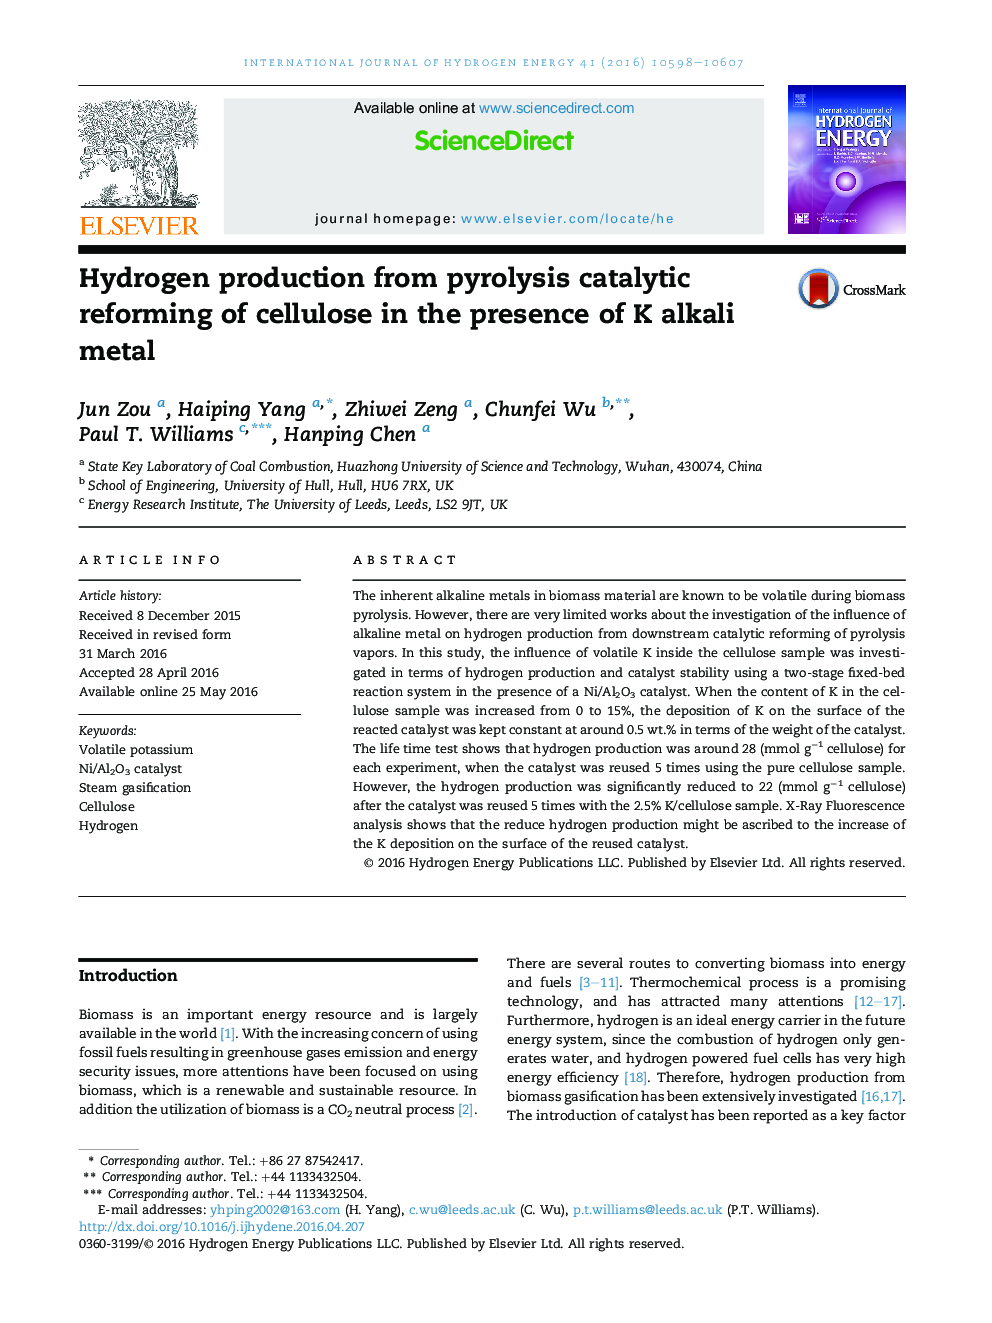 Hydrogen production from pyrolysis catalytic reforming of cellulose in the presence of K alkali metal